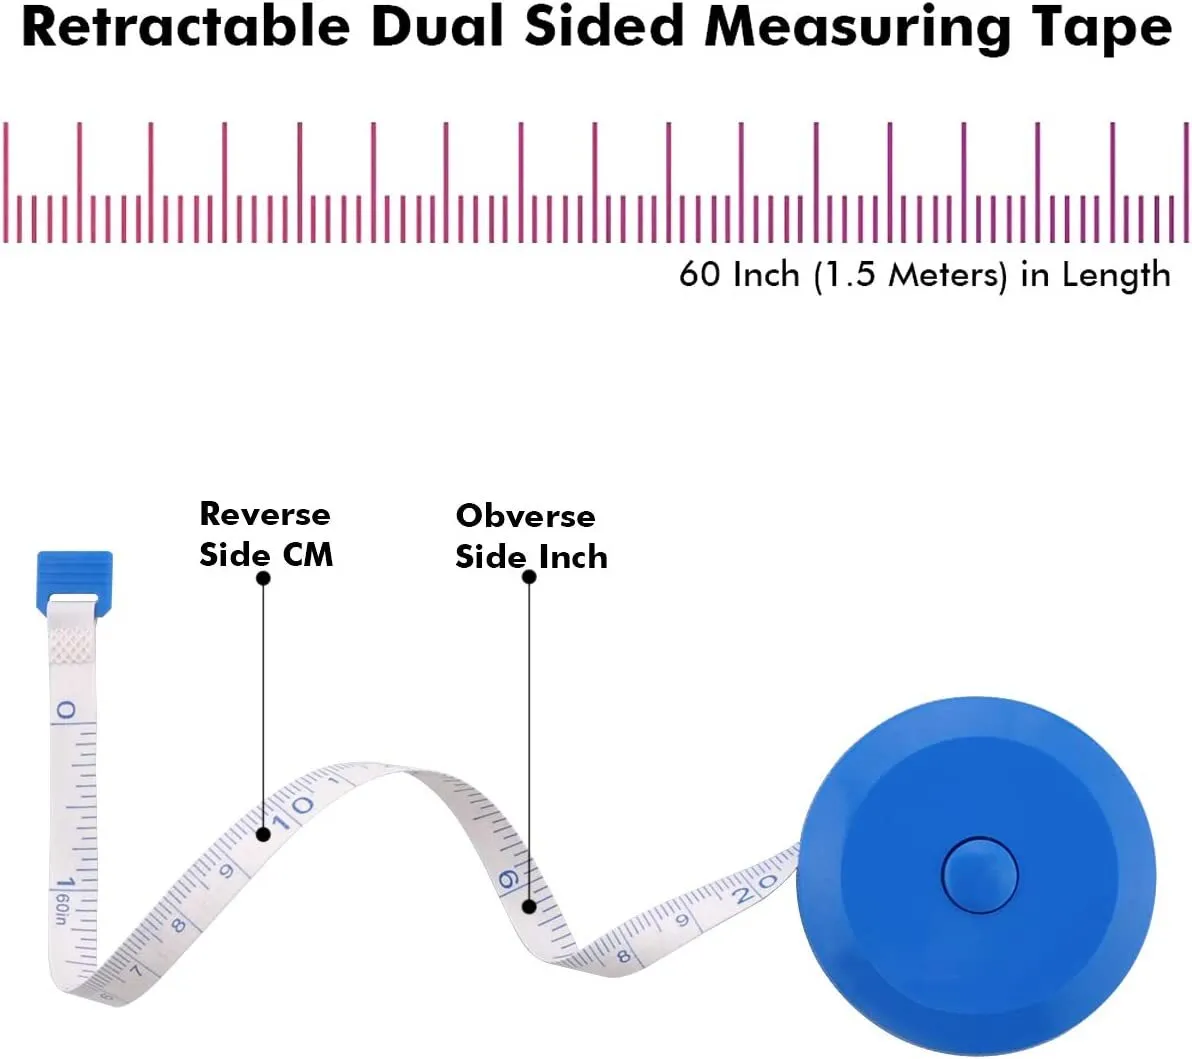 2PCS Measuring Tape Soft Tape Measure for Body Sewing Fabric